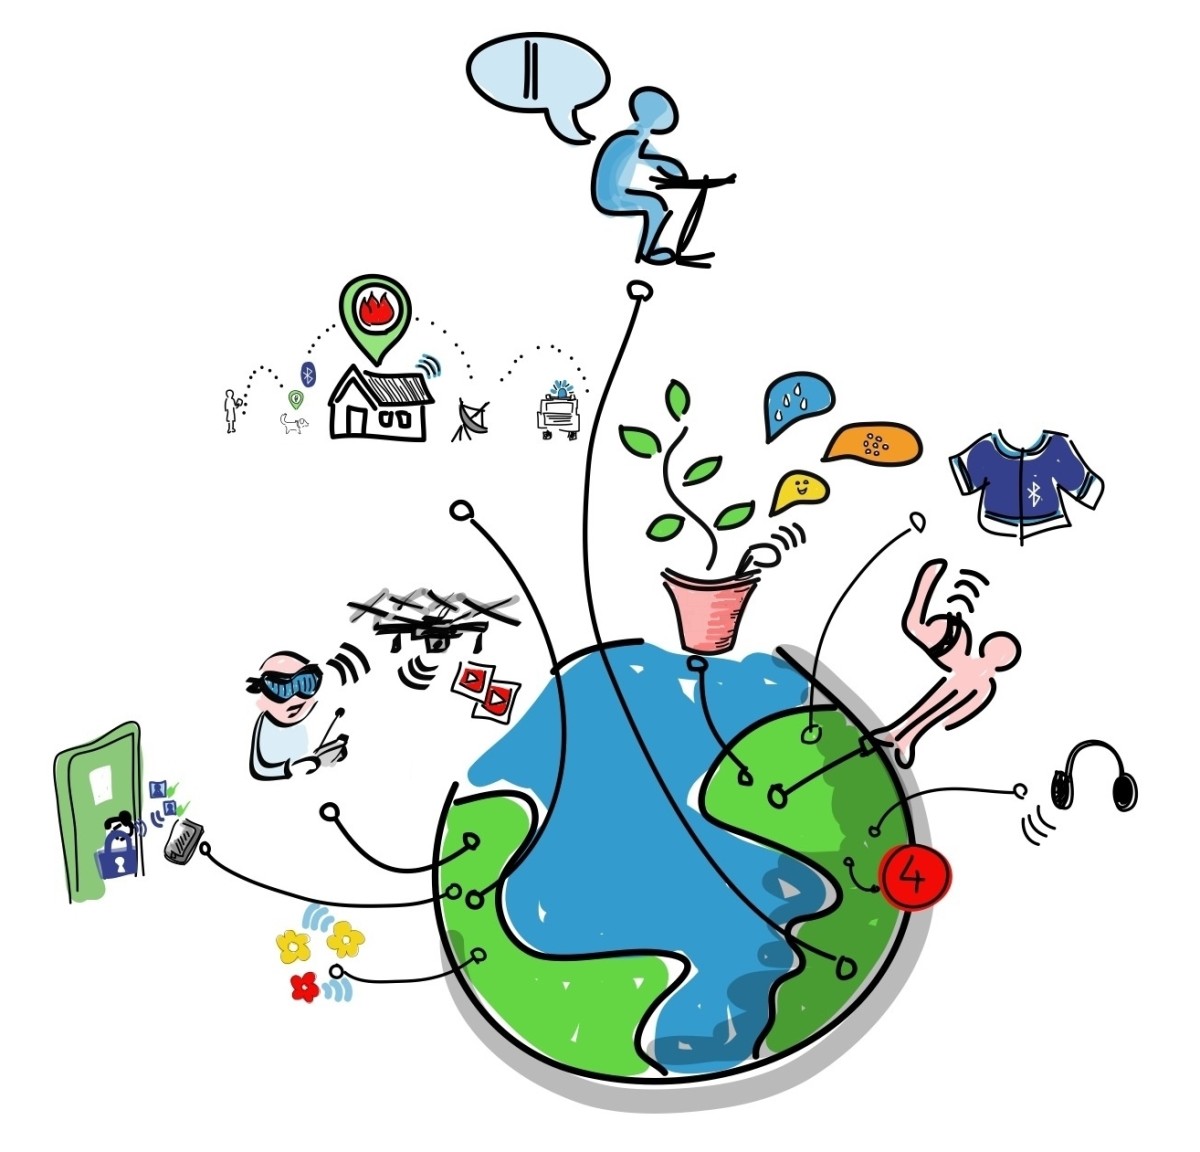 A Research Paper: Challenges and Countermeasures of Internet of Things